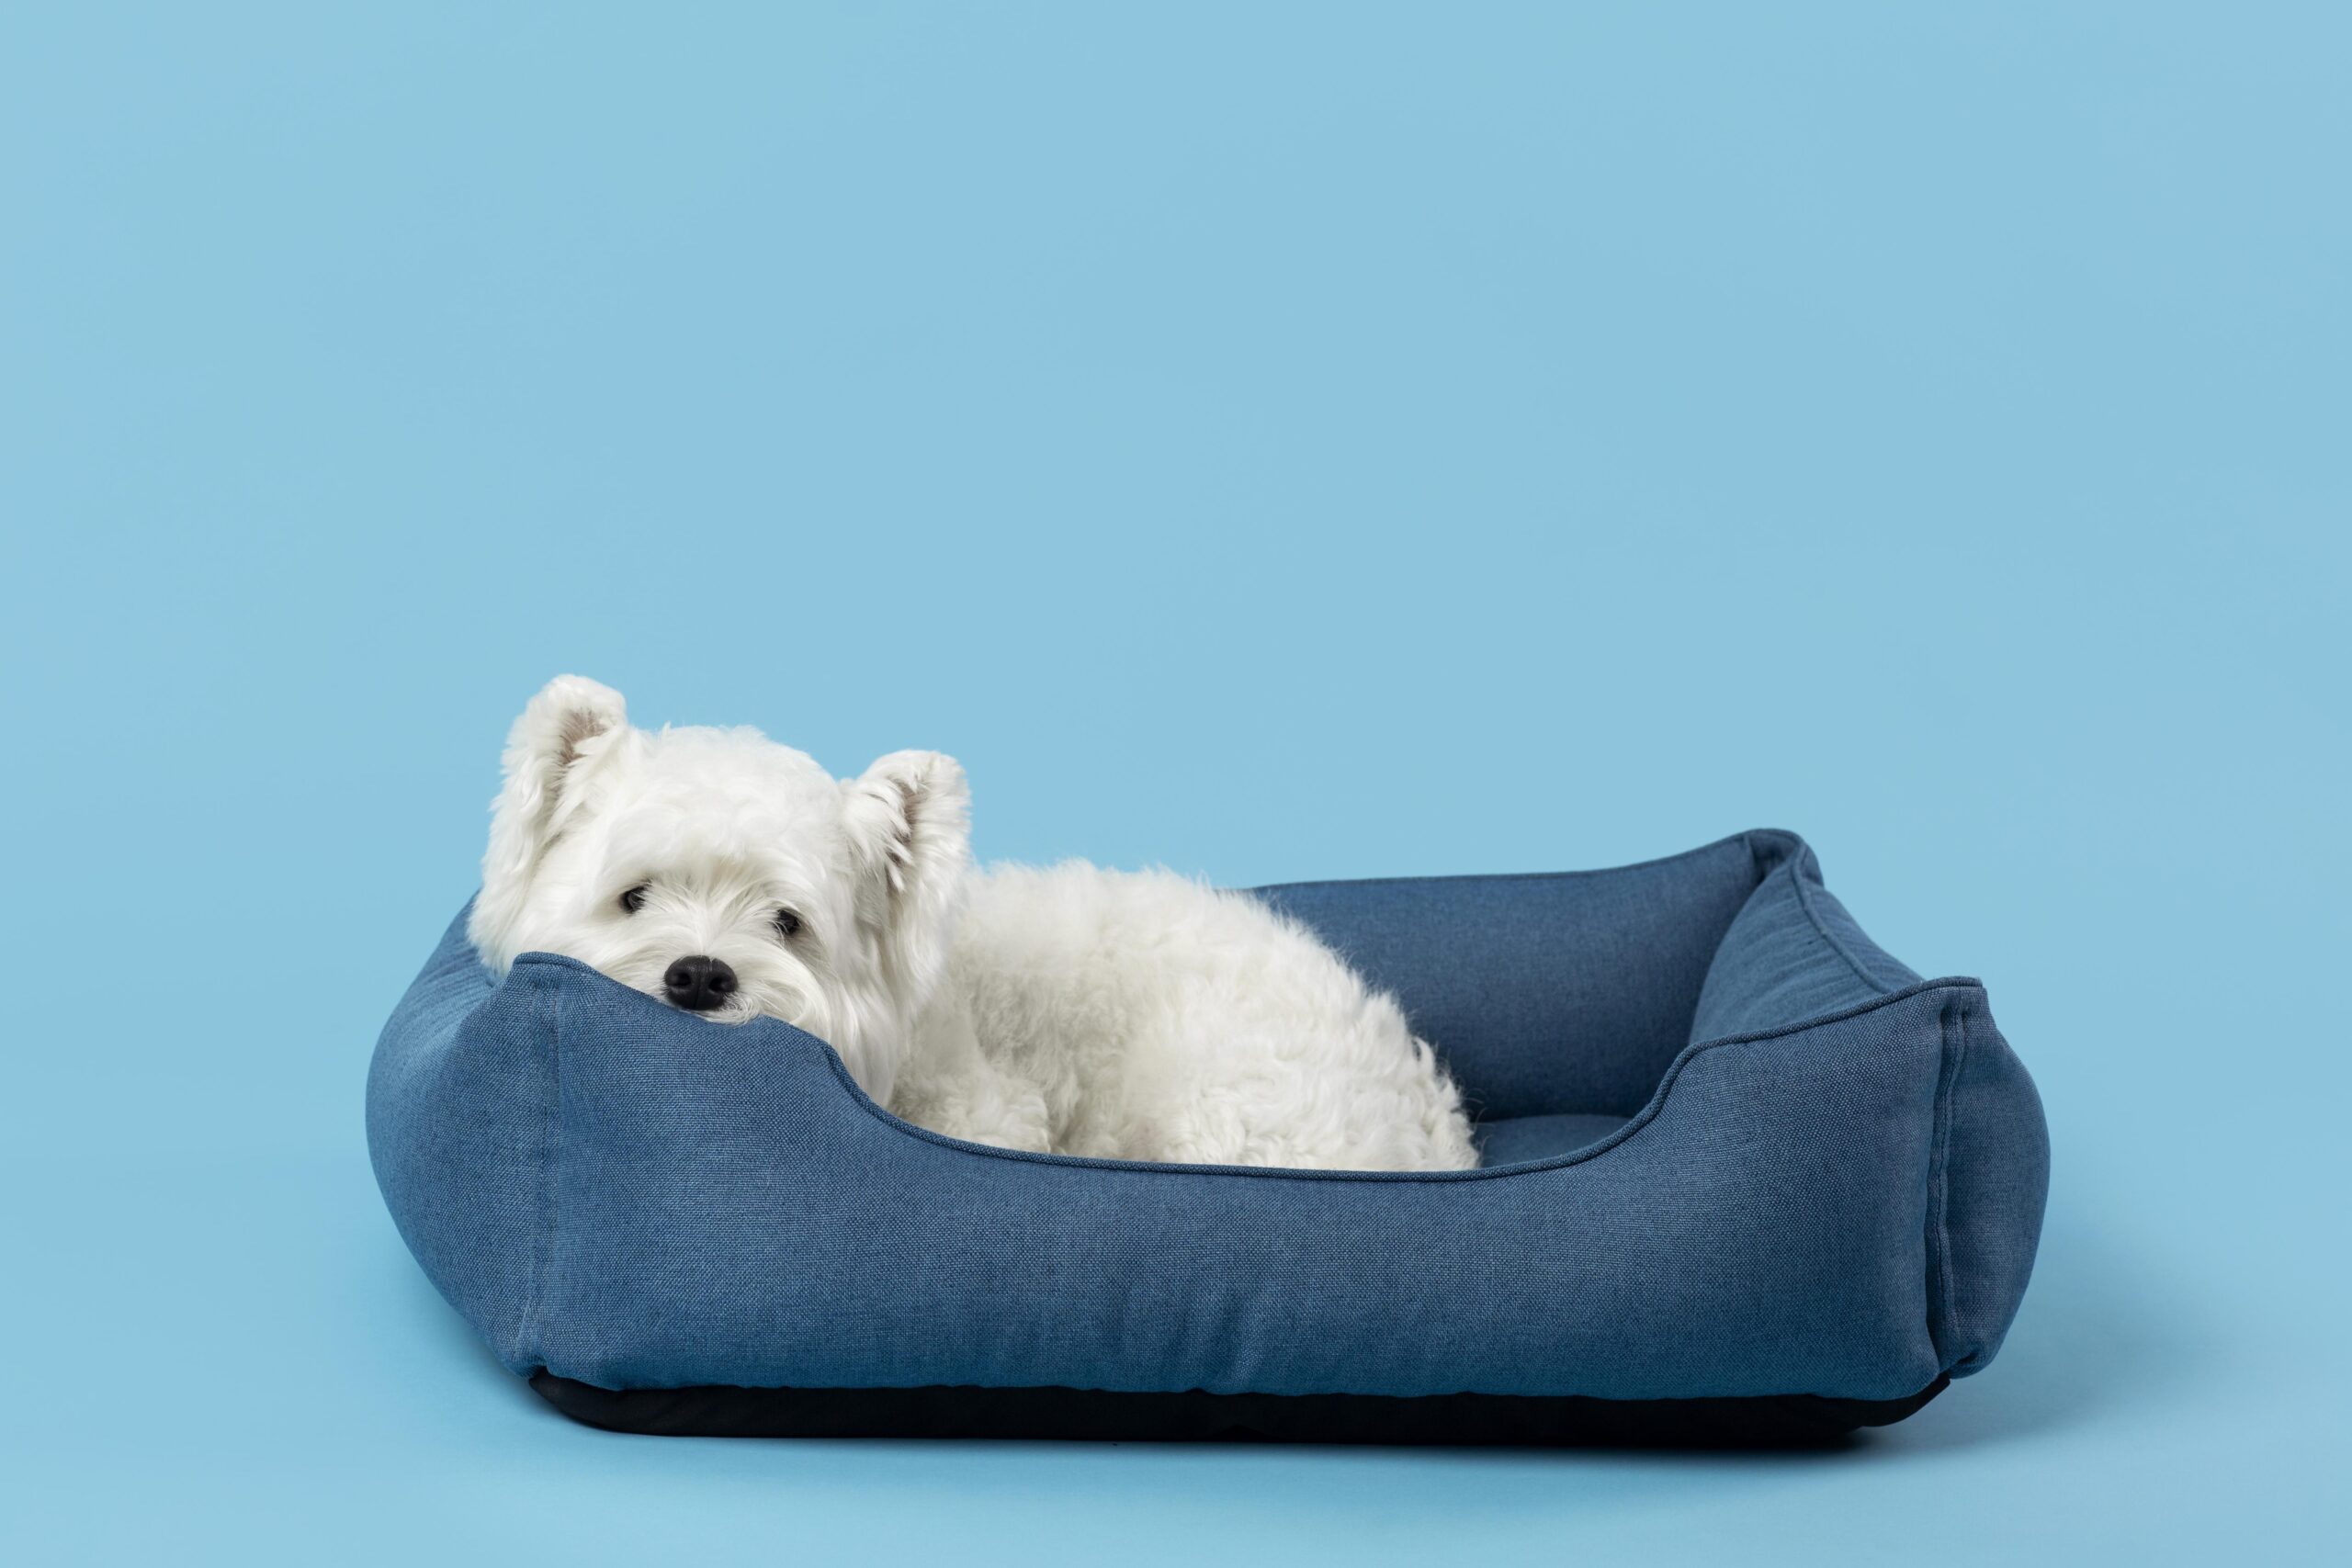 A Guide to Choosing the Best Dog Beds for Puppies